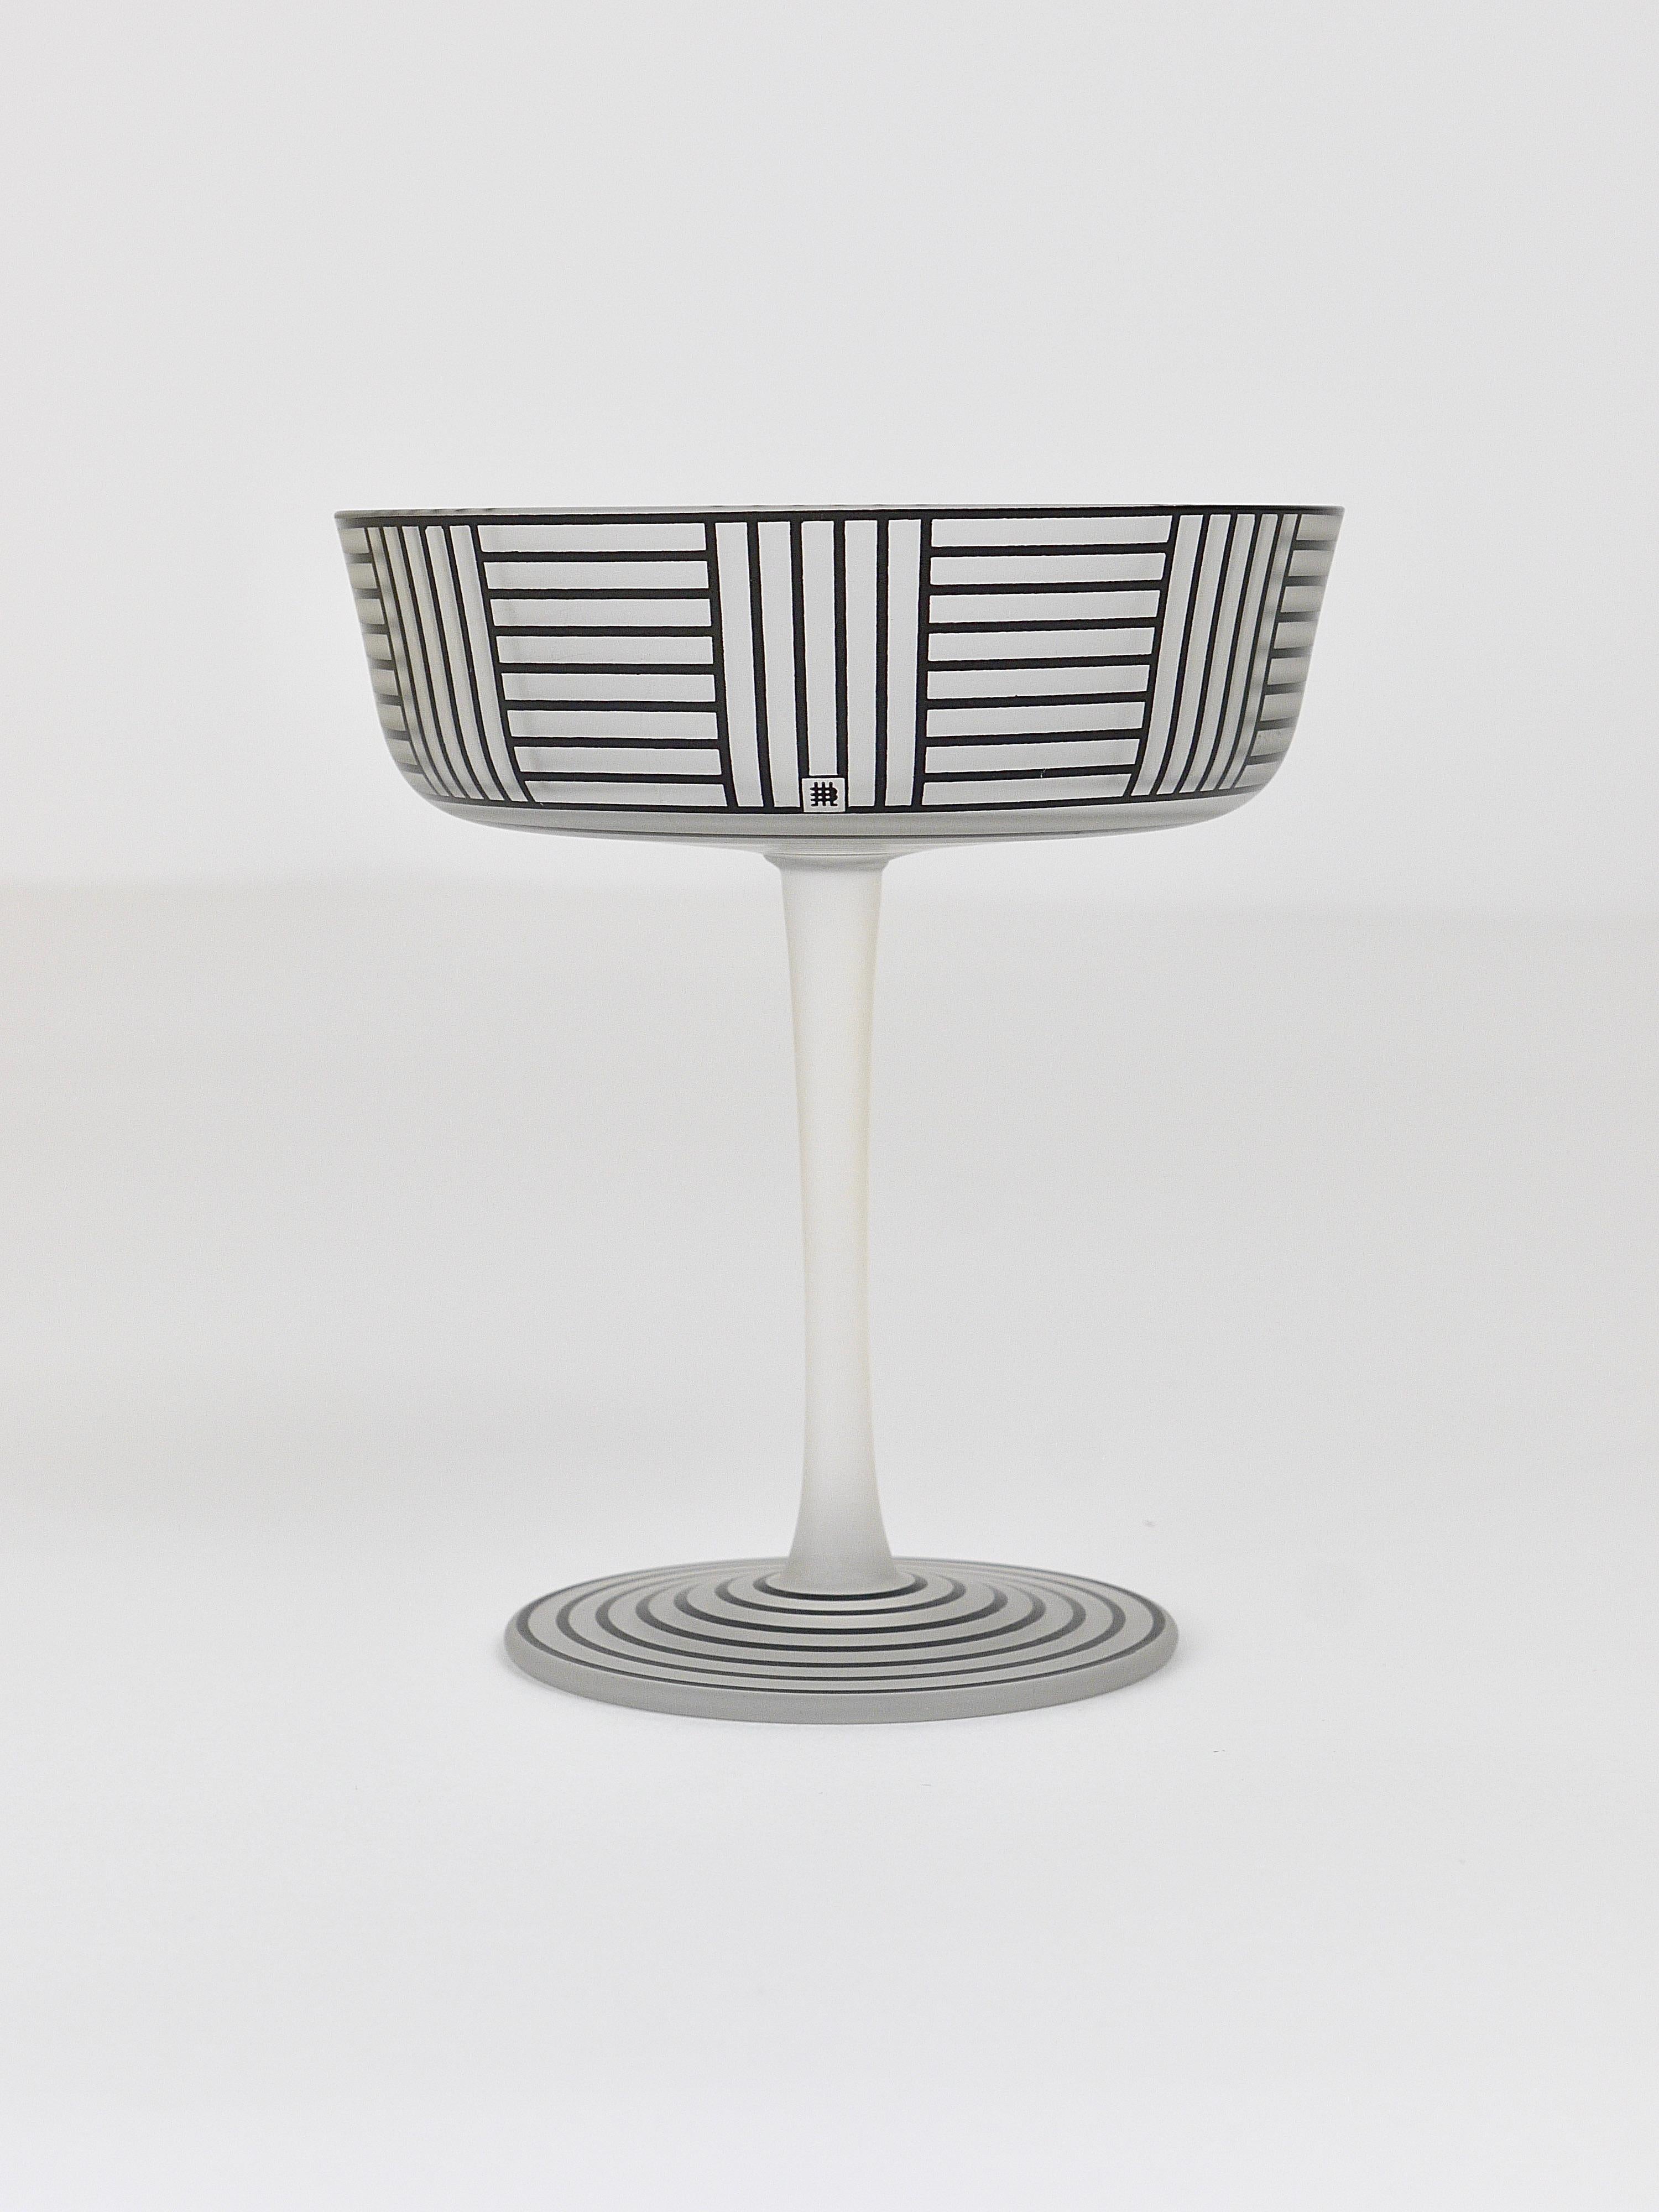 A beautiful and elegant champagne cup, designed by Josef Hoffmann in 1912. Completely handmade of Fine satined, frosted muslin glass, mouth-blown in a wooden mold with a wonderful geometric enamel bronzit decoration. Executed by J. & L. Lobmeyr in